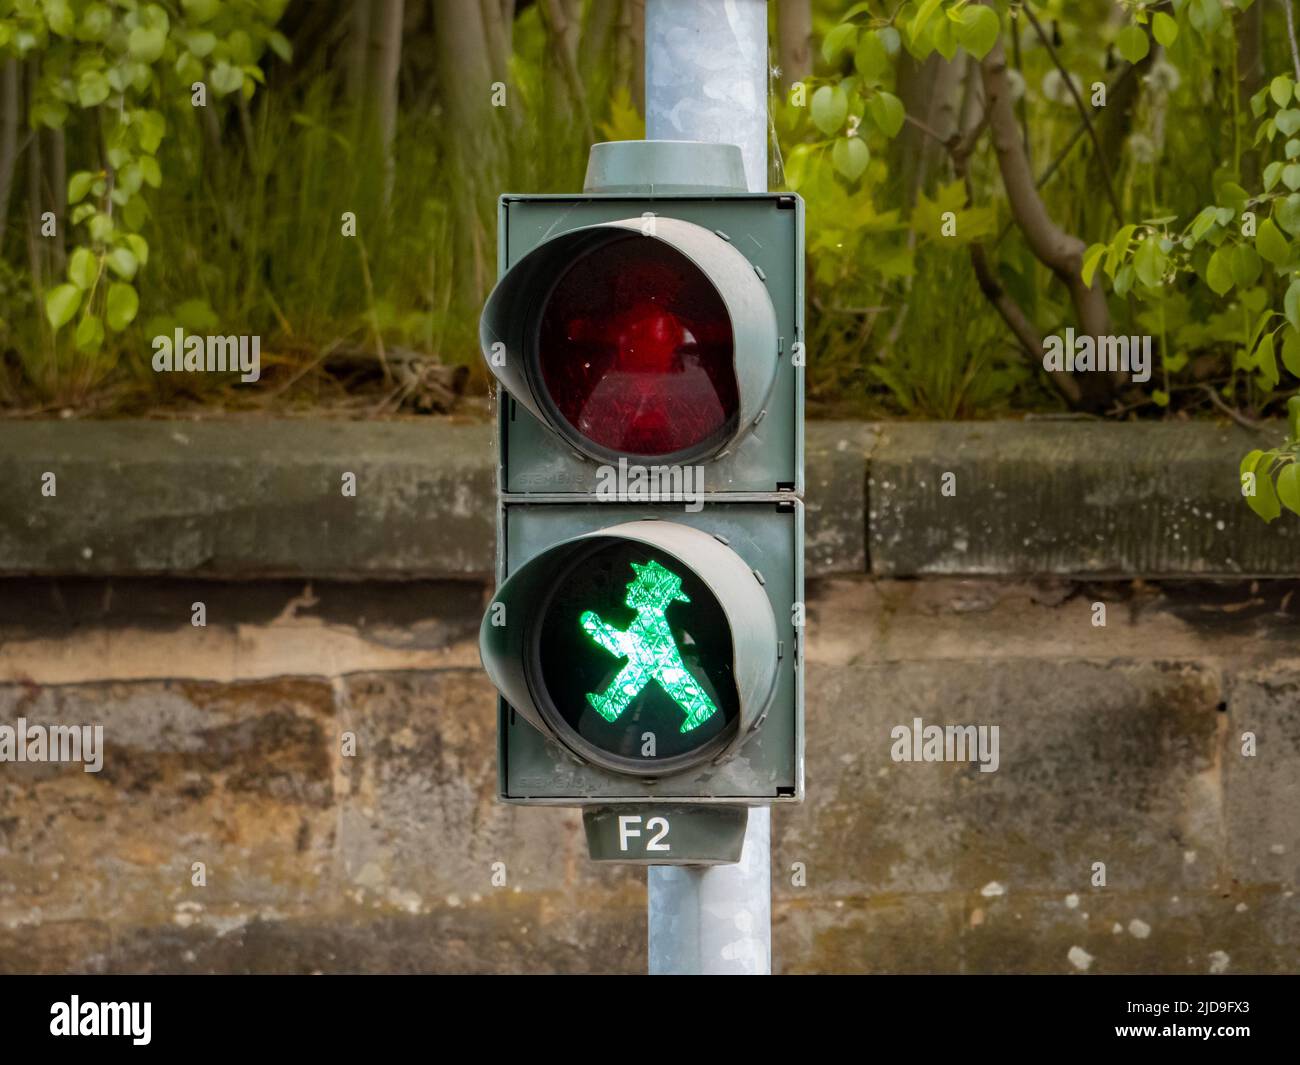 Traffic light for pedestrians showing a go symbol for crossing the street. A green illuminated walking figure is the signal for starting. Stock Photo